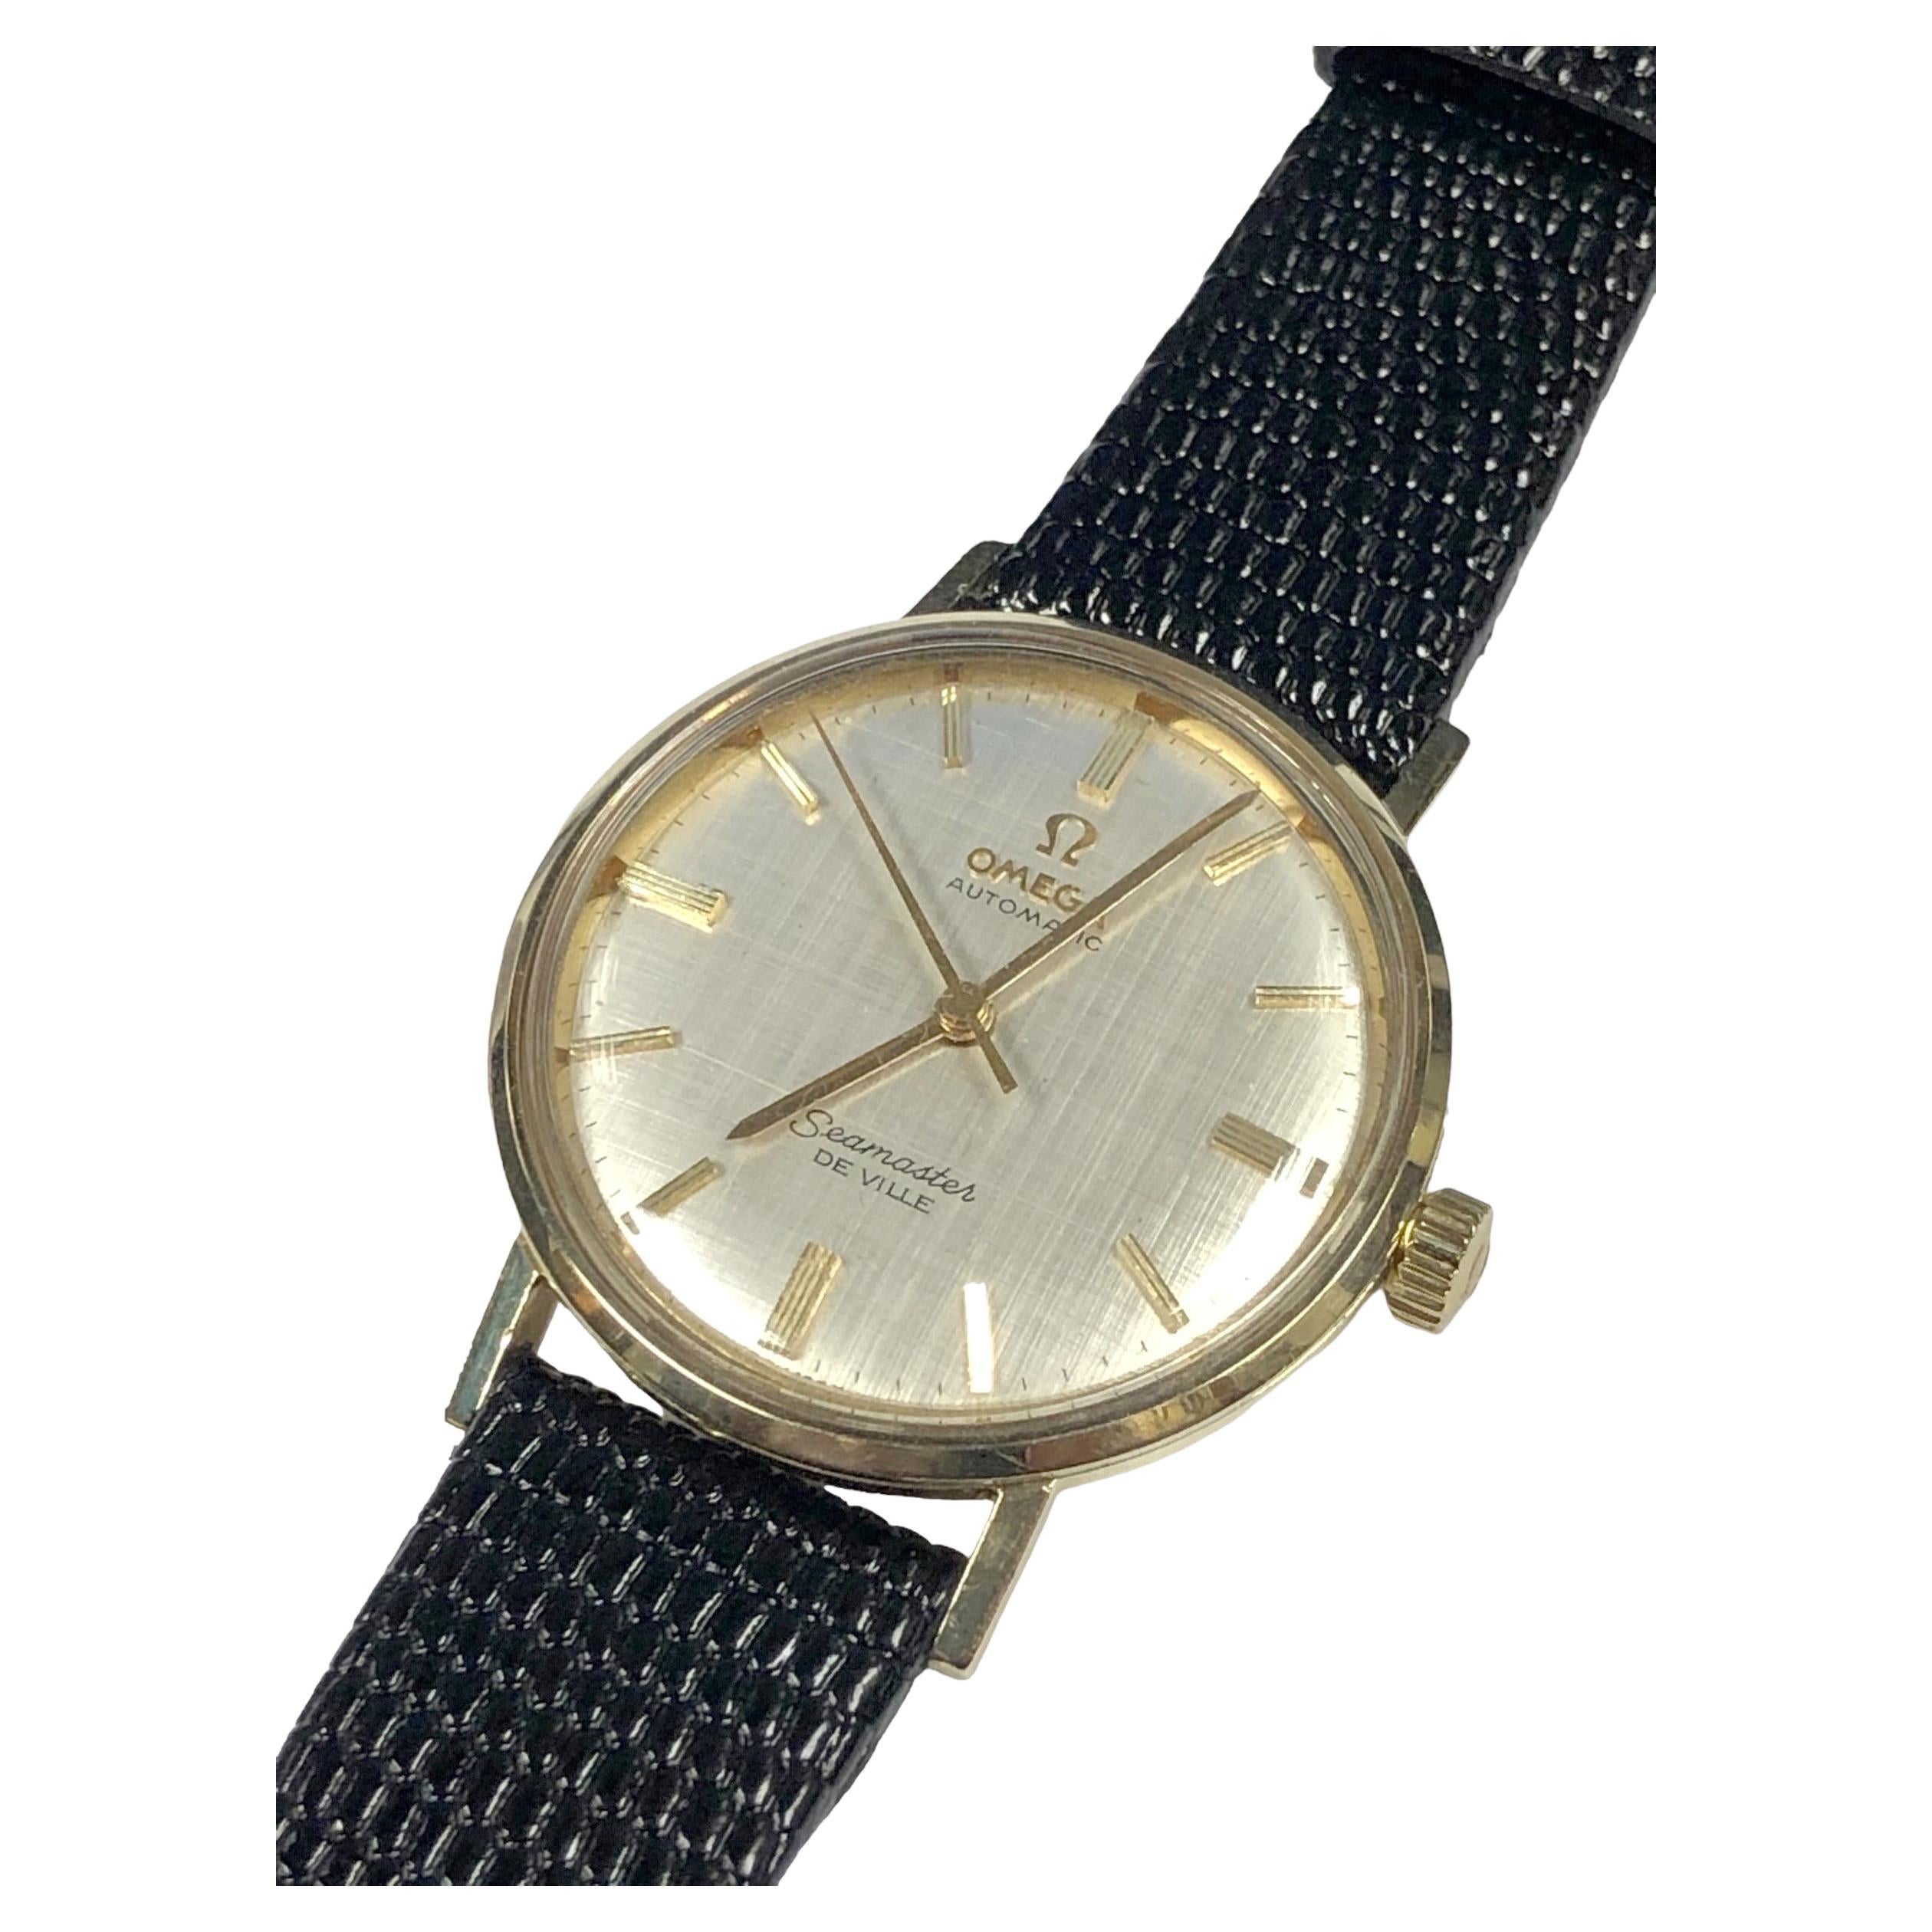 Omega Seamaster De Ville Vintage Yellow Gold Automatic Linen dial Wrist Watch For Sale